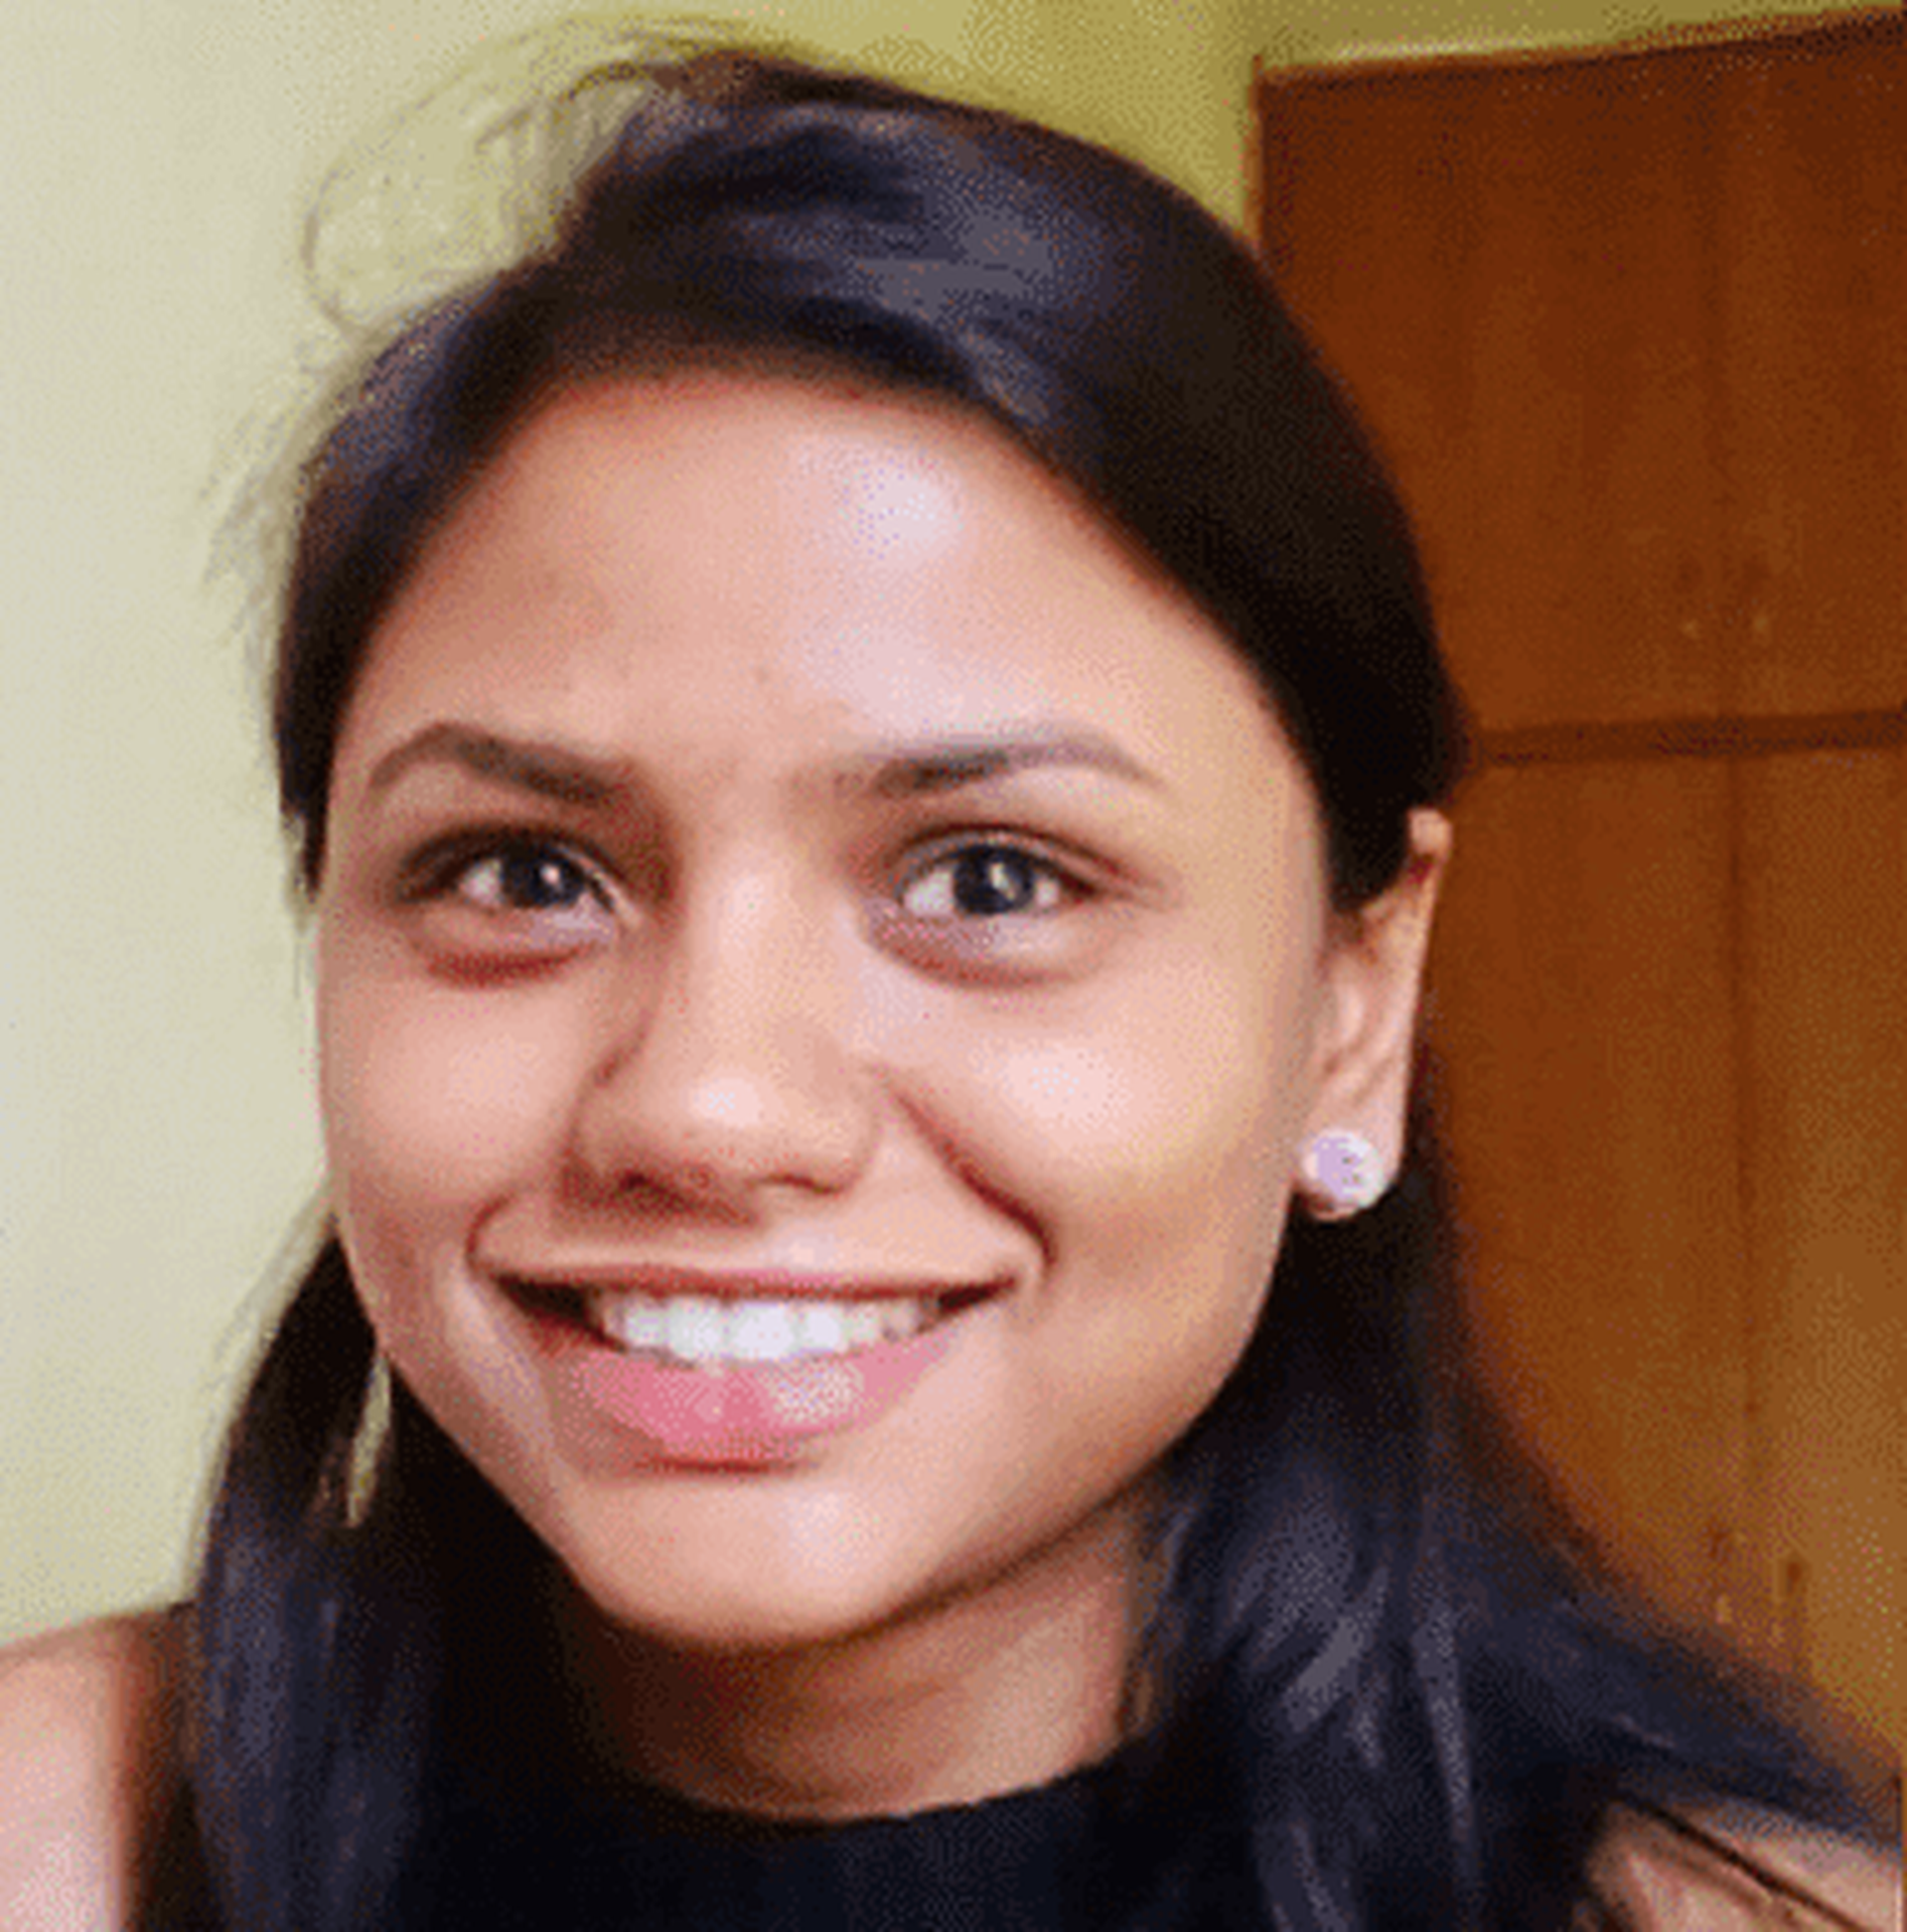 Shruti Ghatge, CEO and co-founder, Zomentum